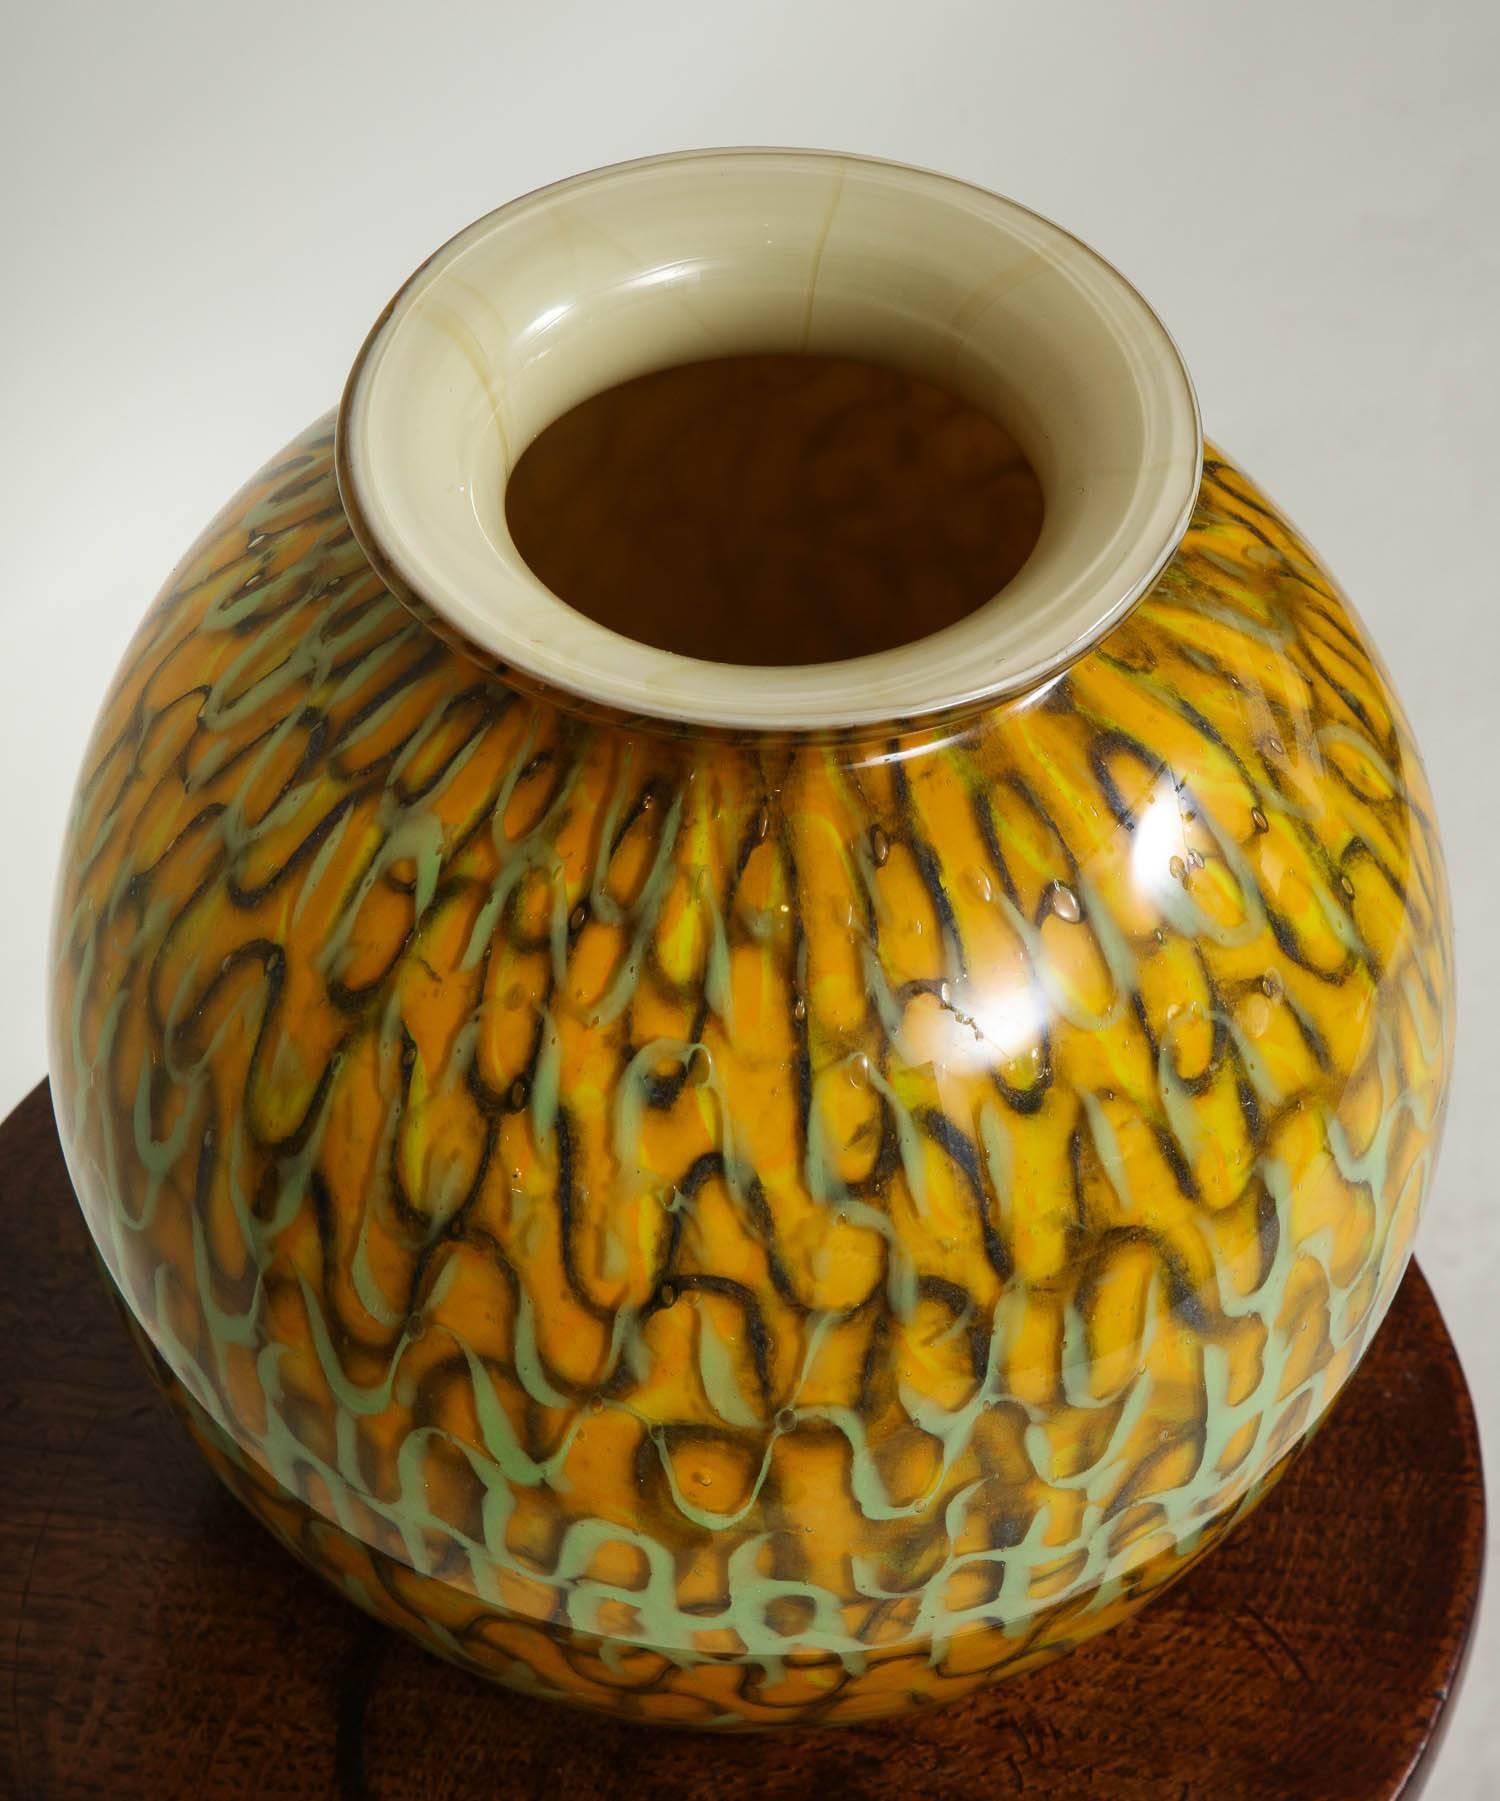 A vase with pale green and sable sinuous ribbon pattern decoration on mustard yellow ground of globe form, made of heavy glass.